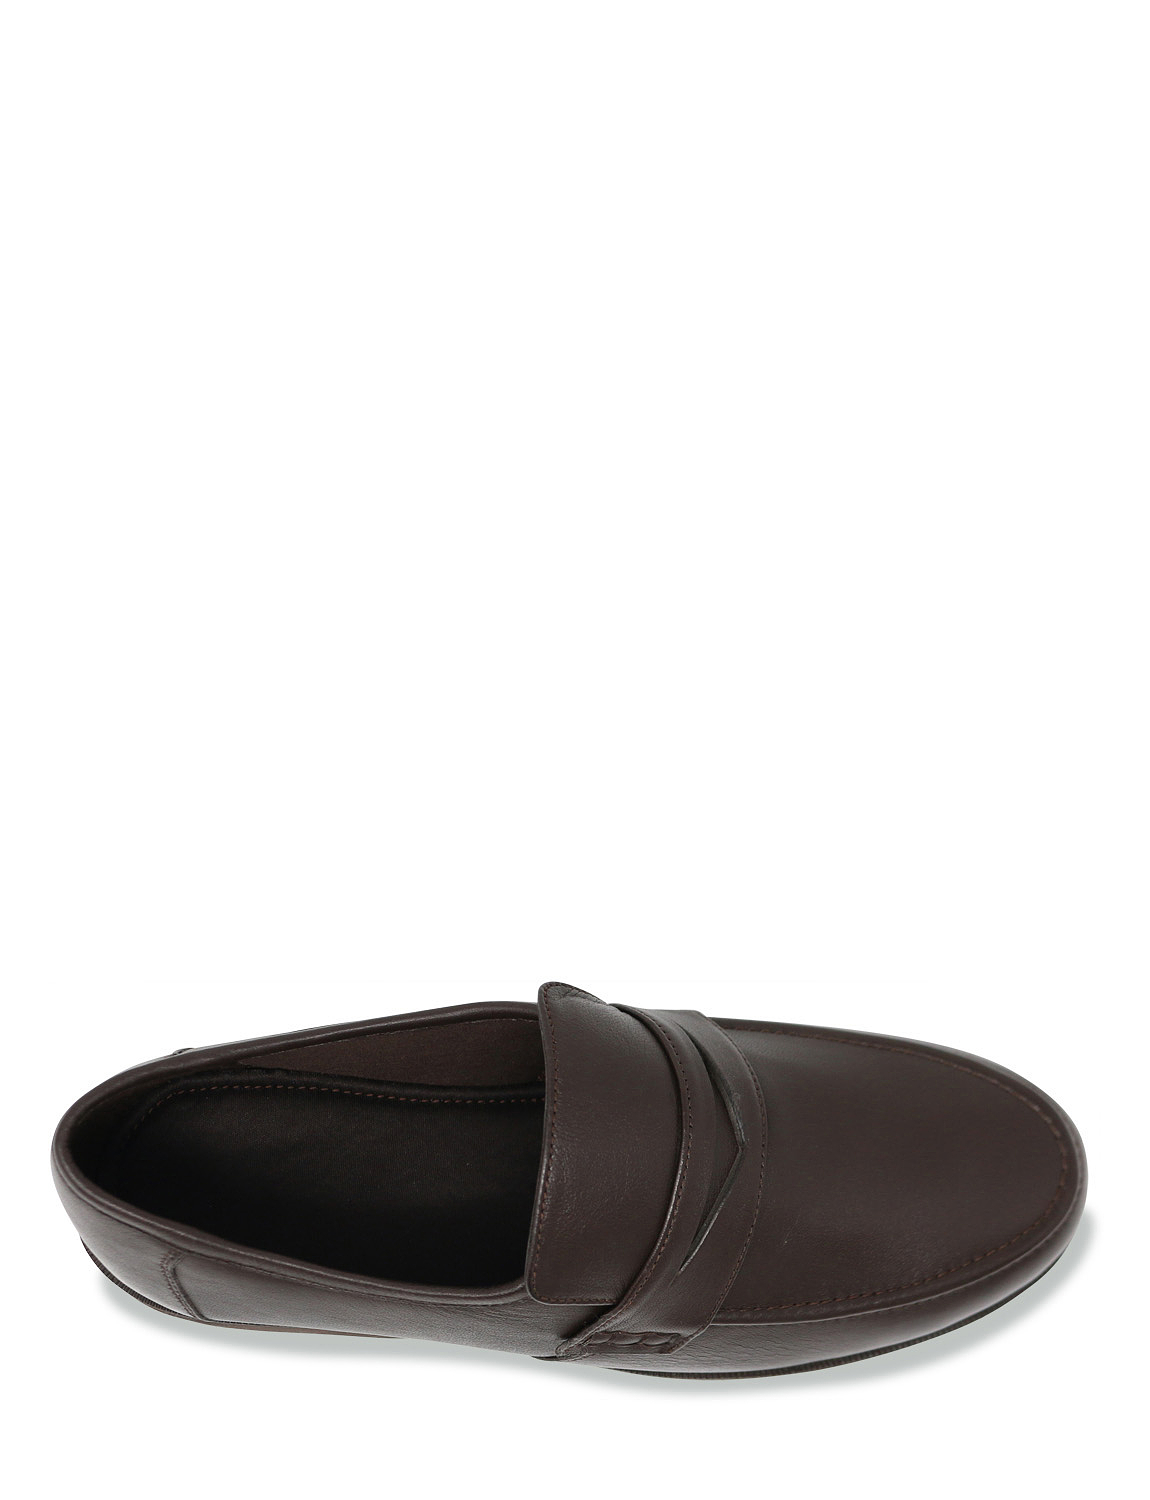 Mens Leather Wide Fit Moccasin Shoes | Chums